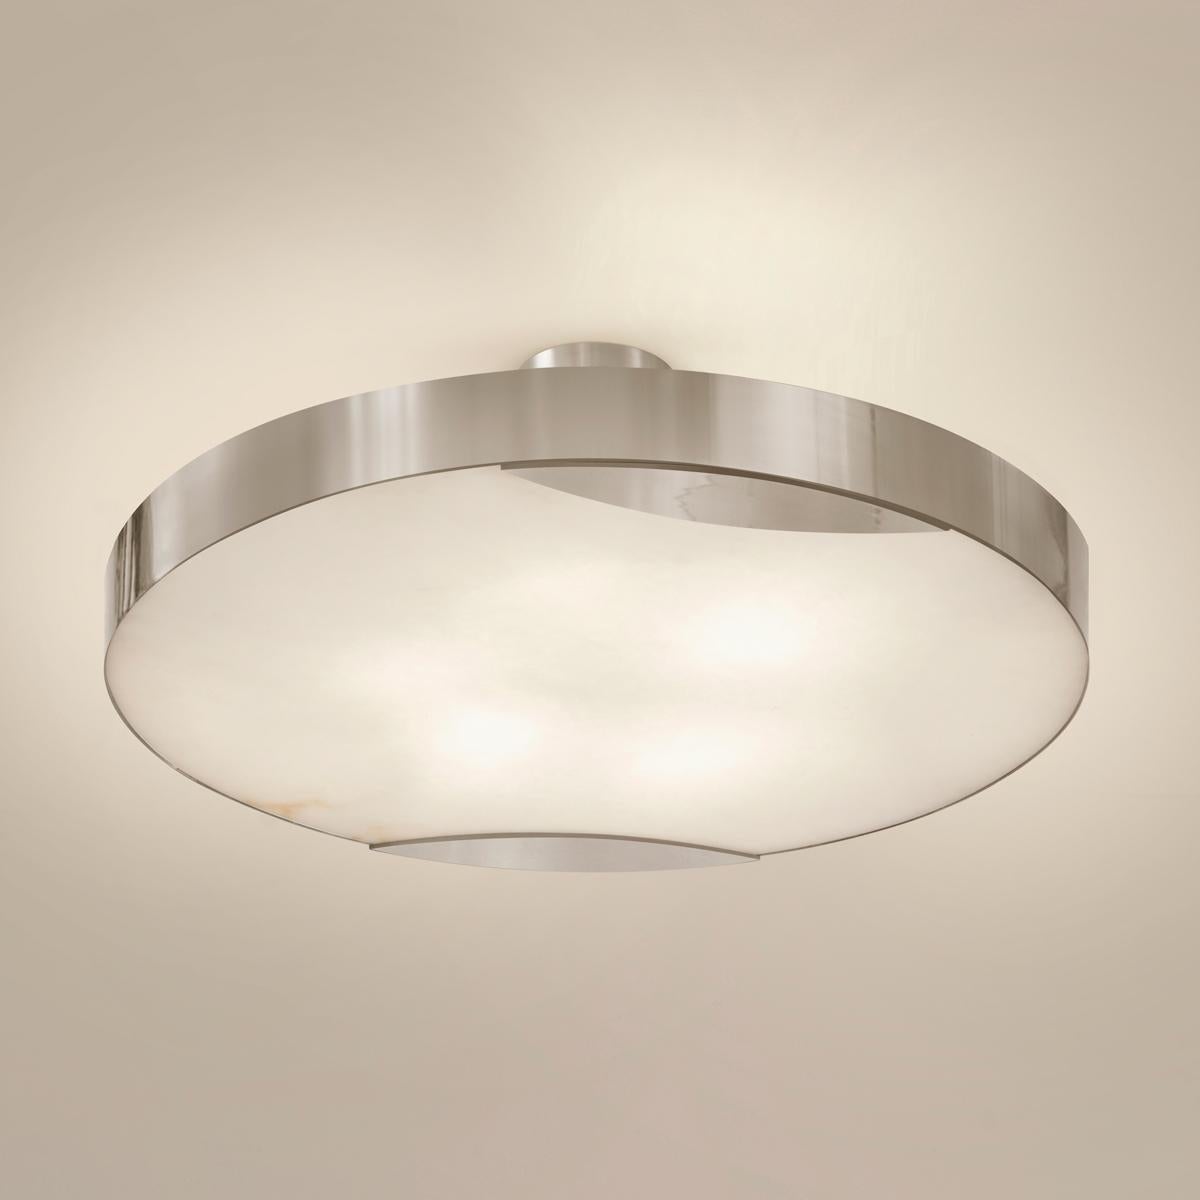 Italian Cloud N.1 Ceiling Light by Gaspare Asaro-Satin Brass Finish For Sale